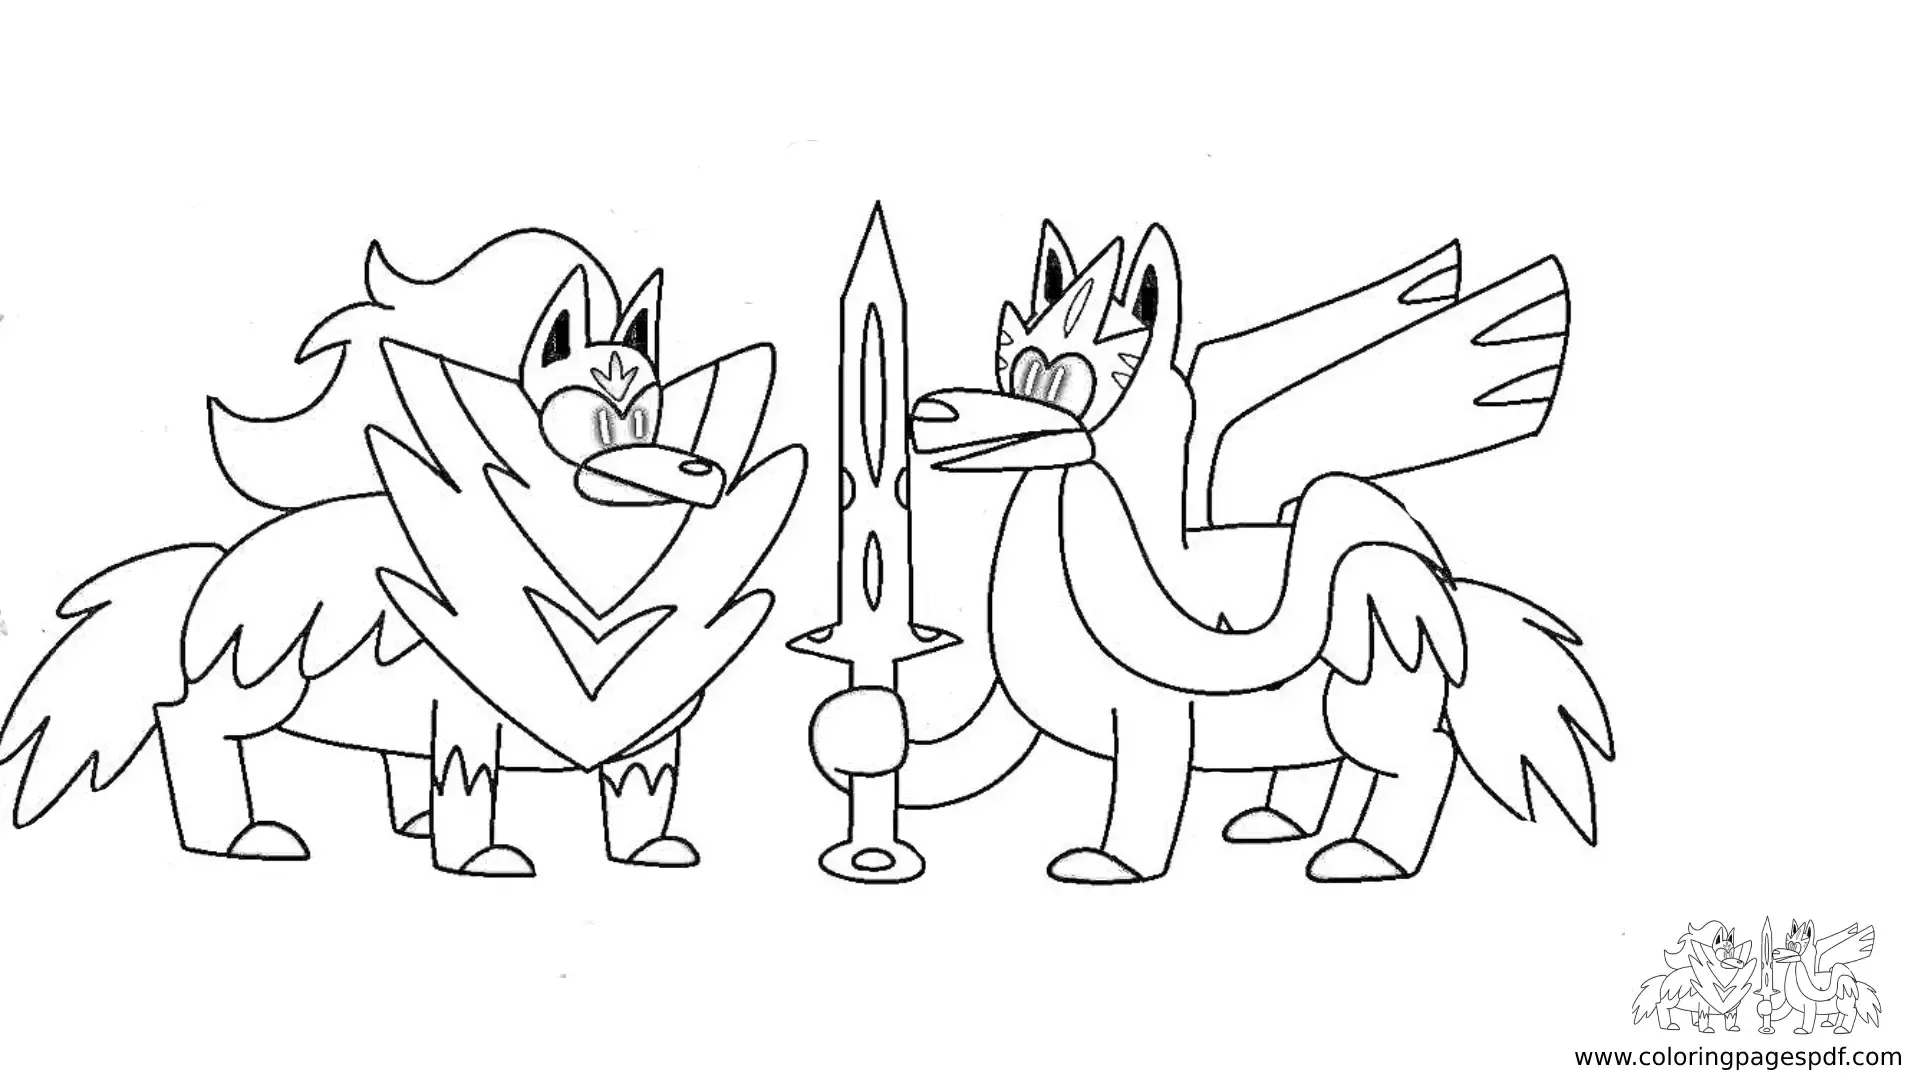 Coloring Page Of A Funny Zacian And Zamazenta